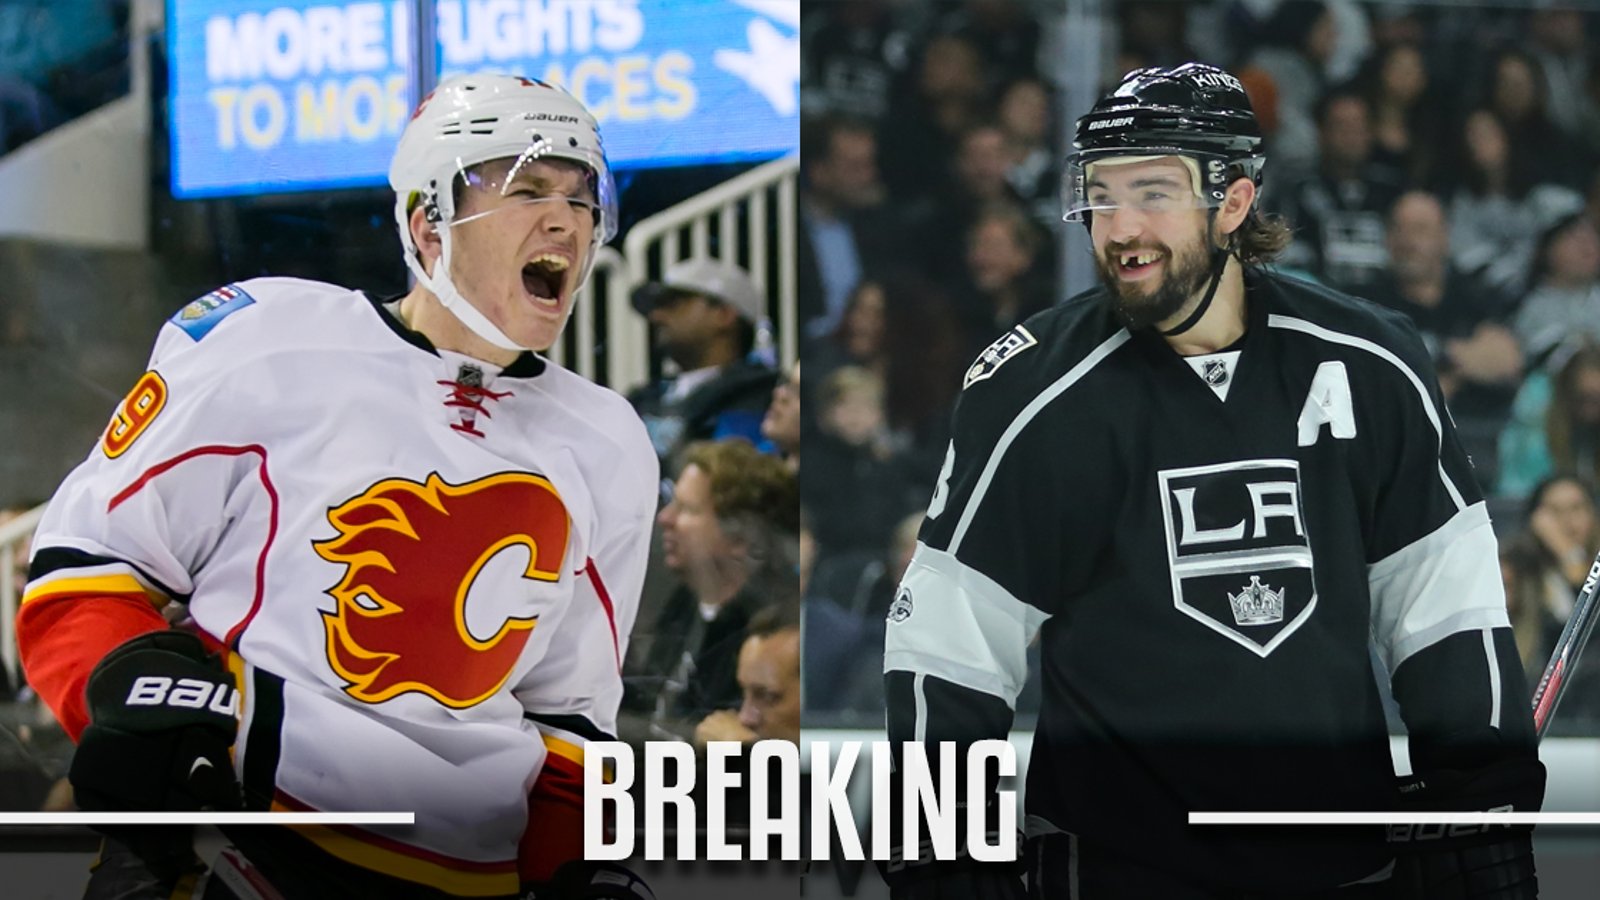 BREAKING: Matthew Tkachuk fires back at Doughty's comments saying he's a DIRTY player.